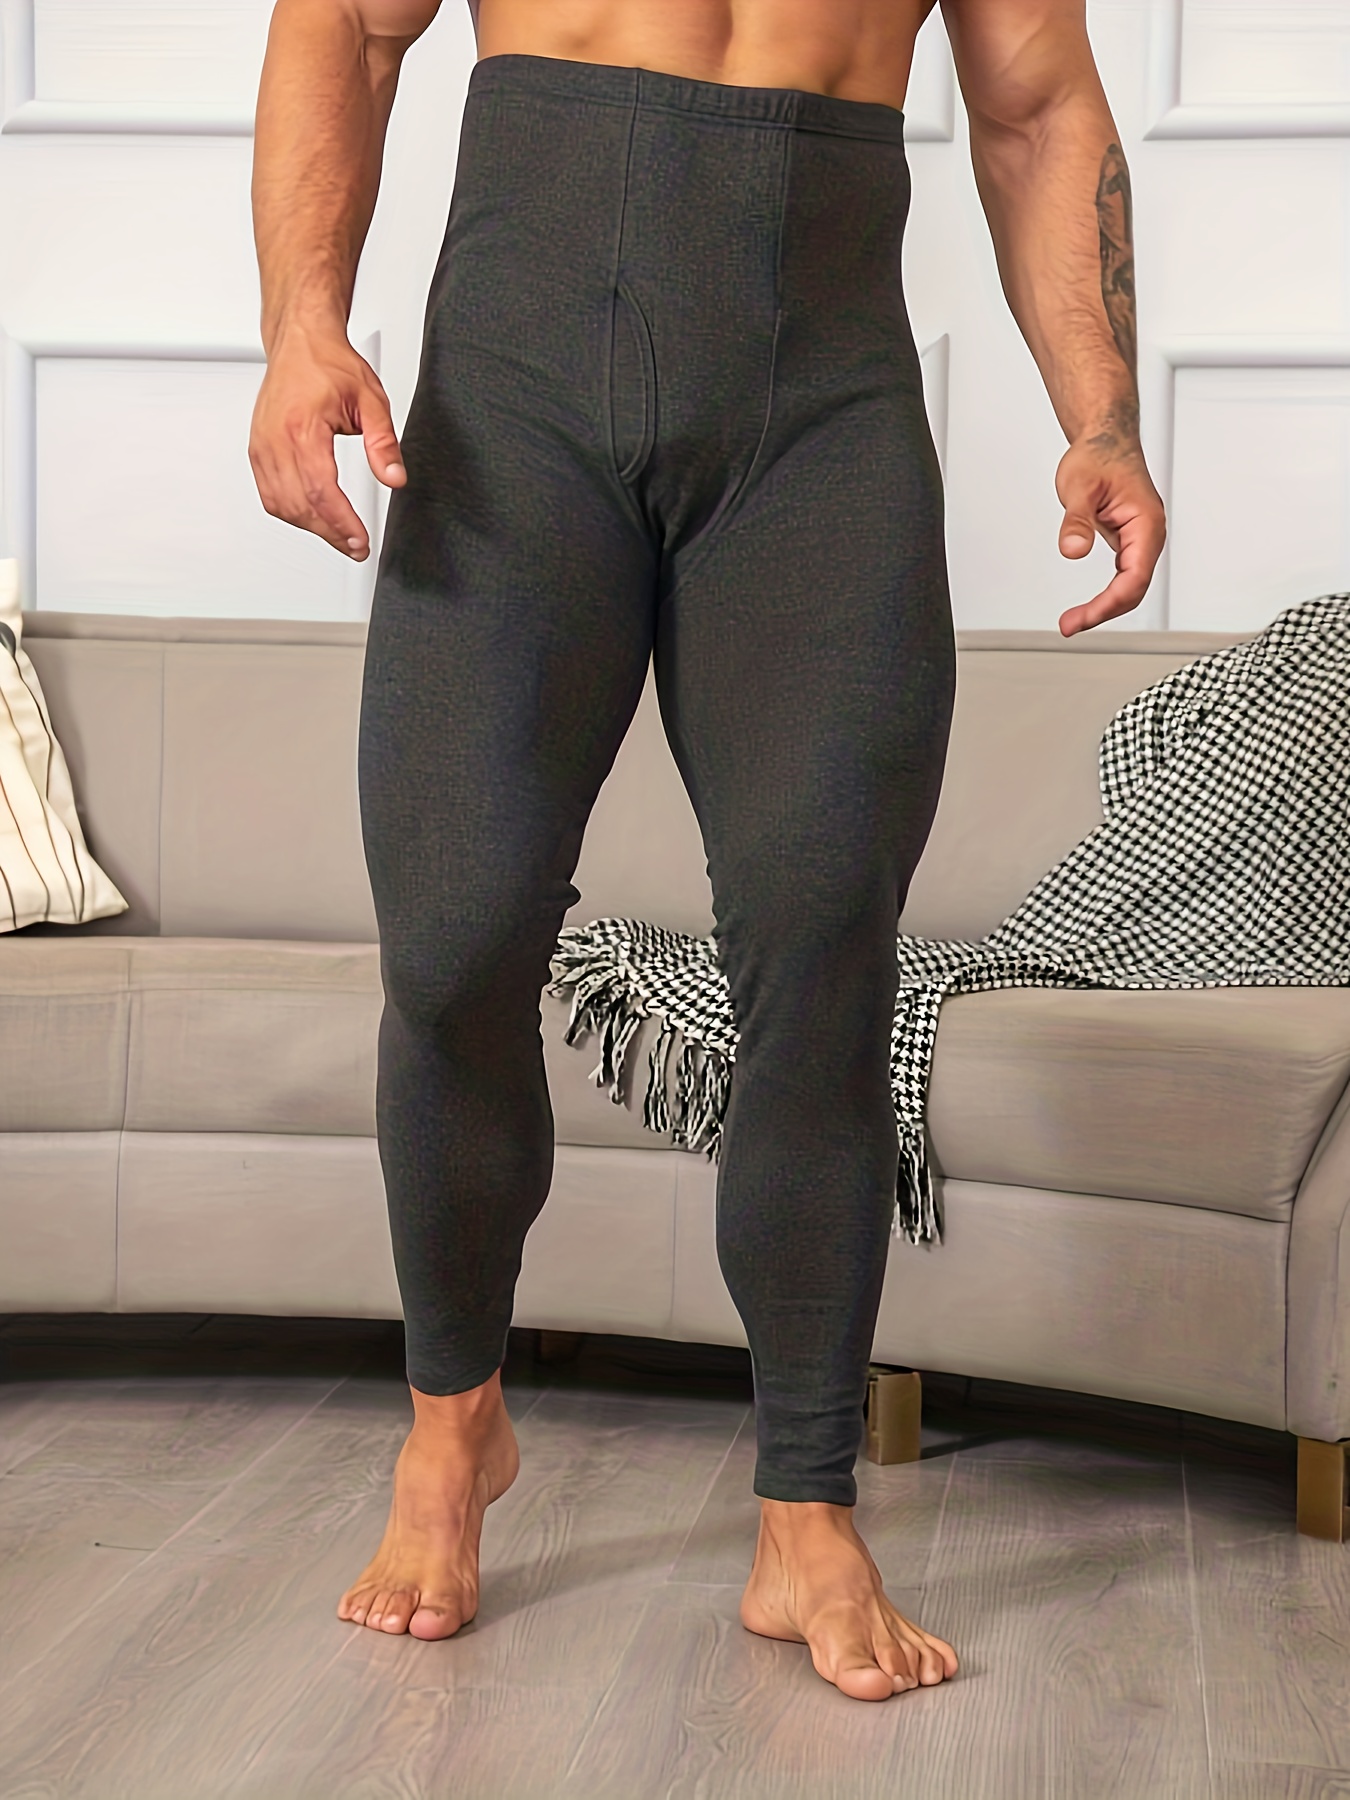 Mens Winter Warm Stretchy Thermal Underwear Bottom Long Johns Pants Ultra  Soft Thermal Bottoms Base Layer Leggings Tights 